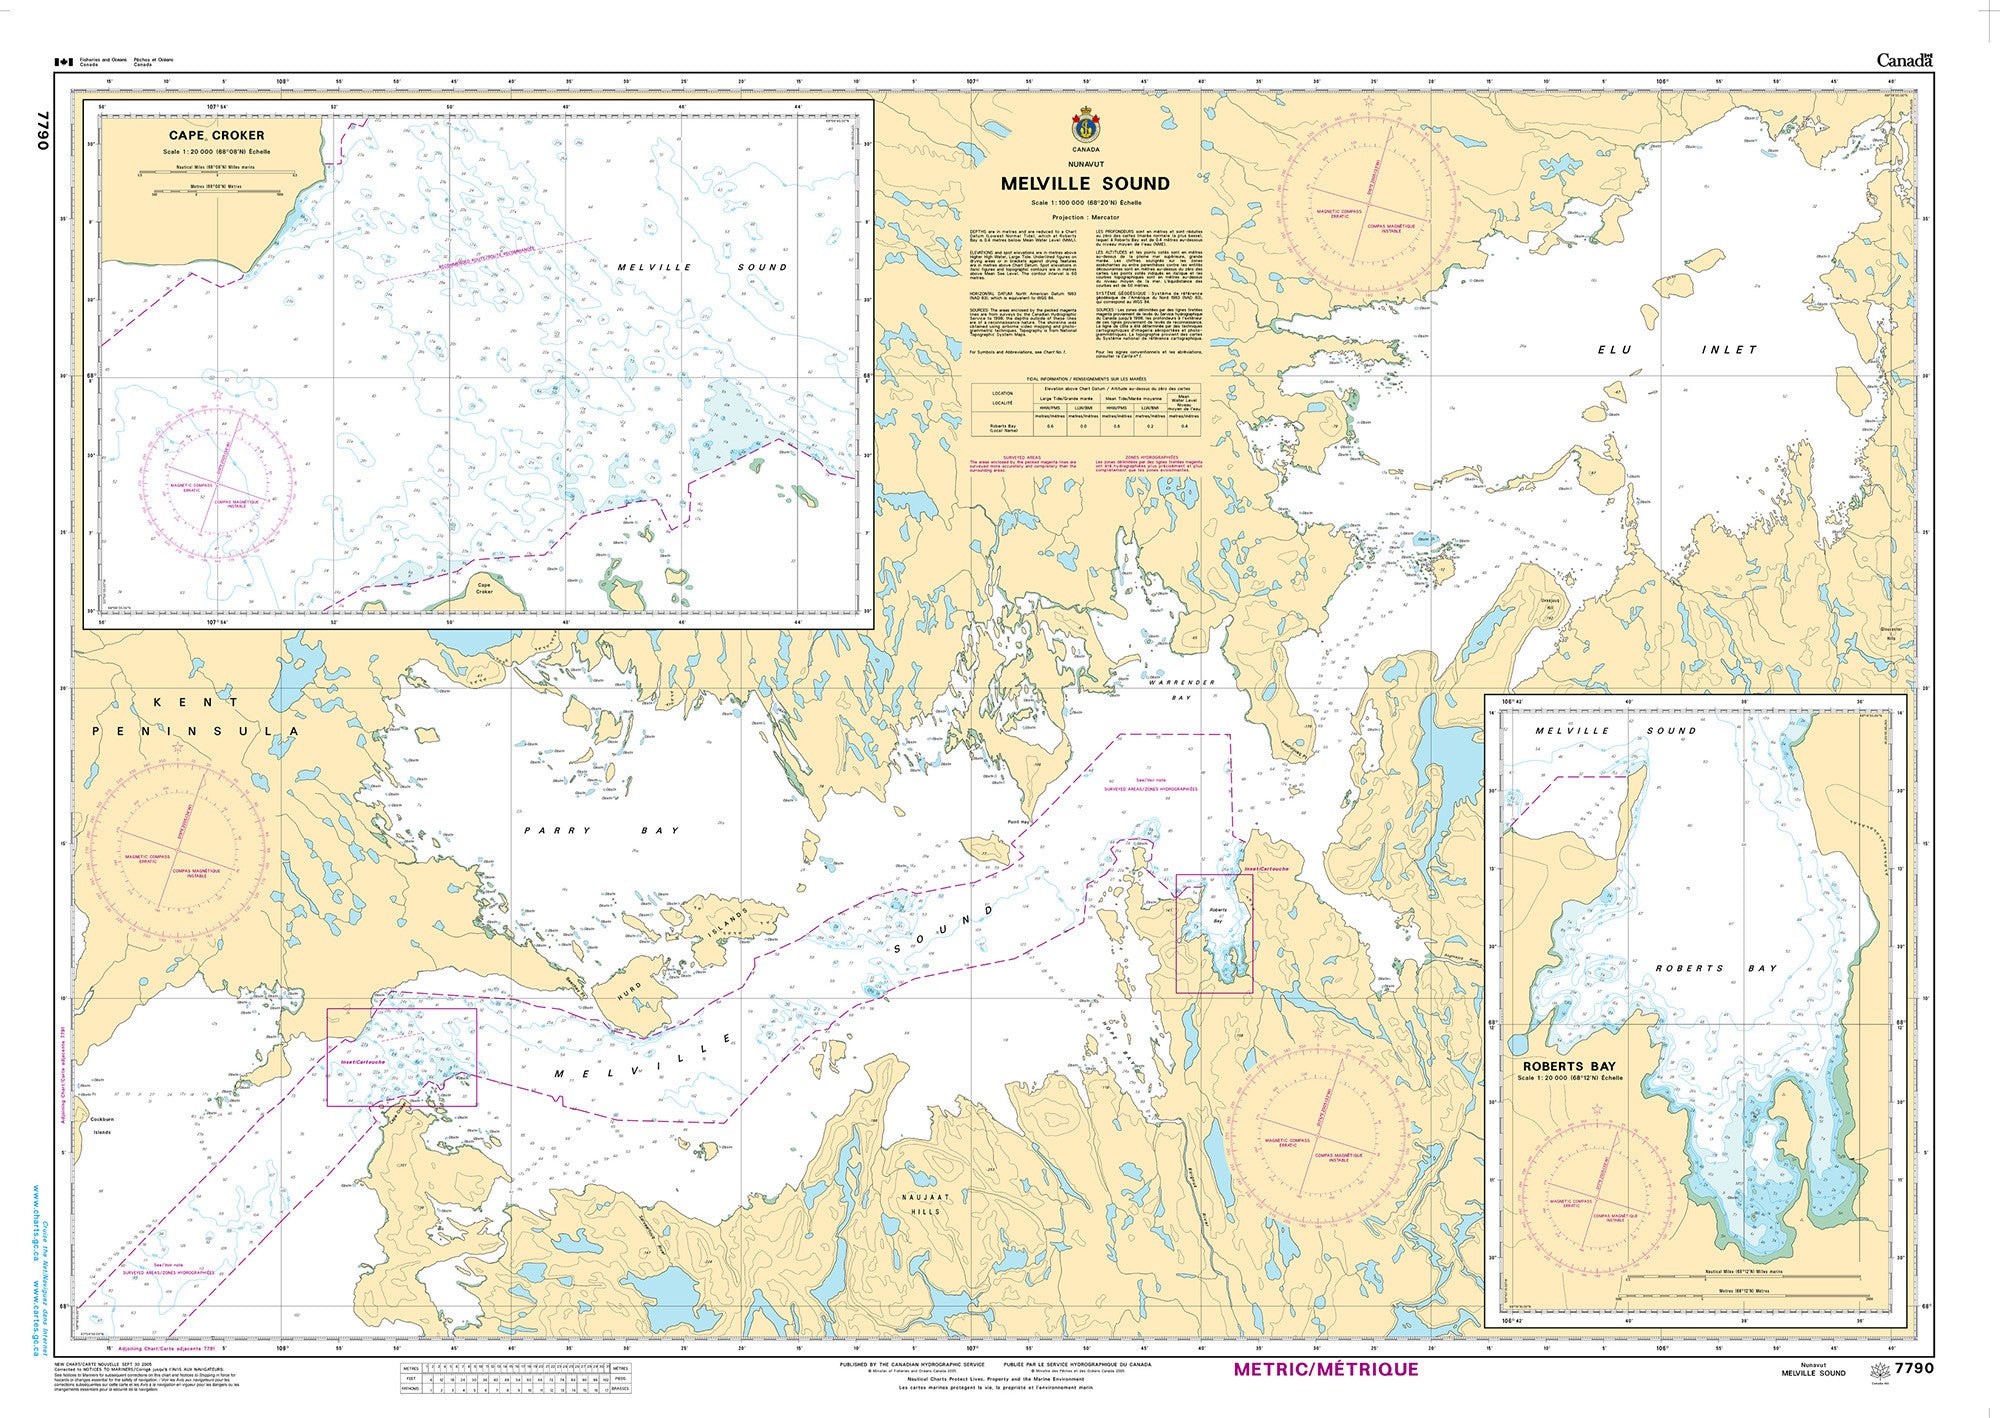 Canadian Hydrographic Service Nautical Chart CHS7790: Melville Sound